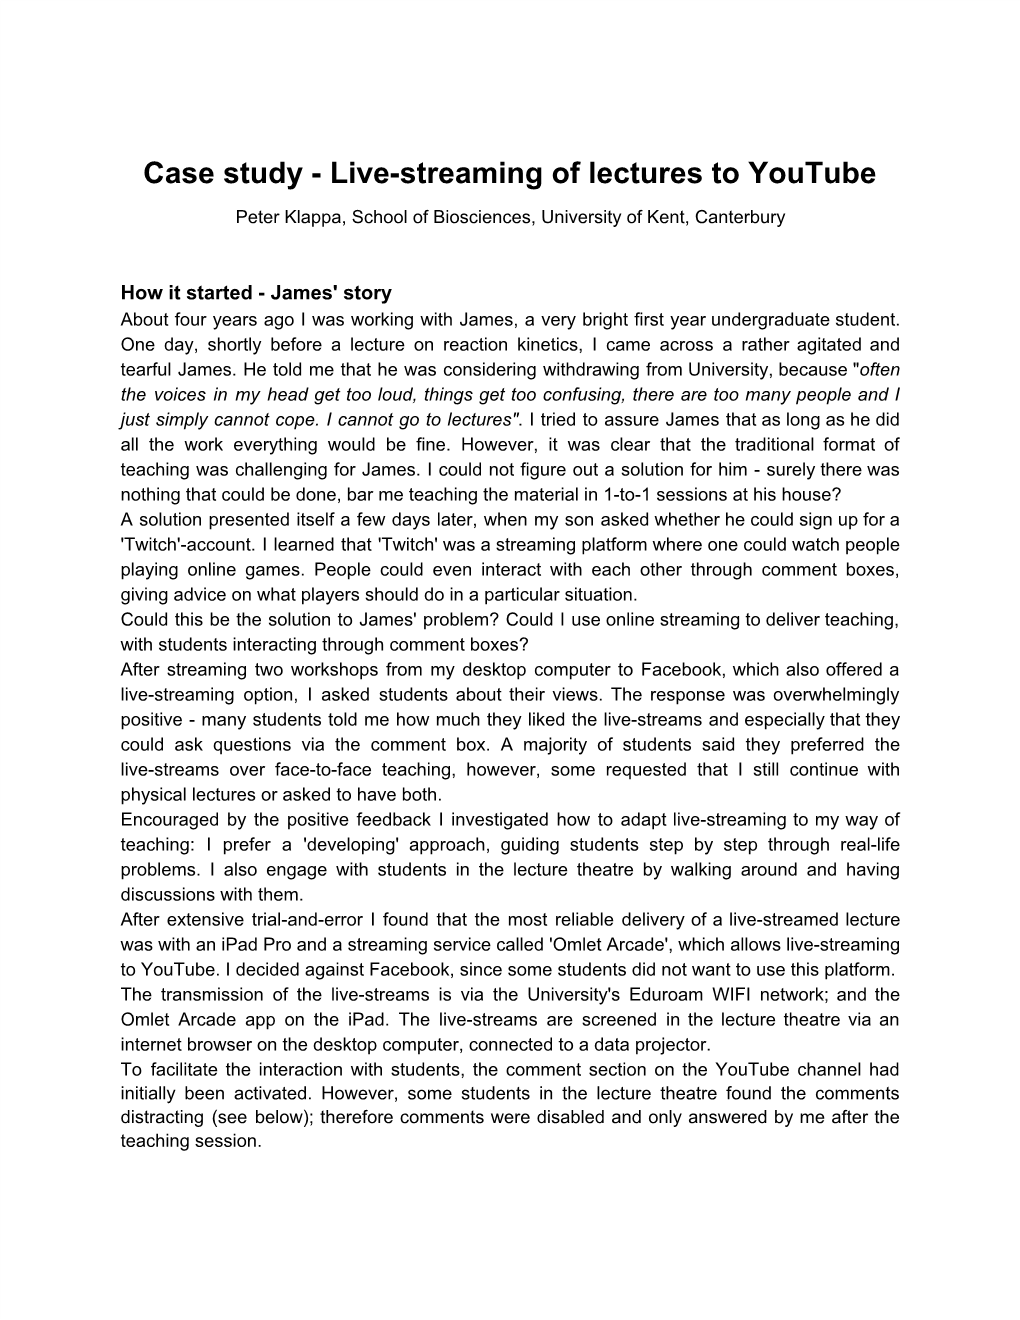 Case Study - Live-Streaming of Lectures to Youtube